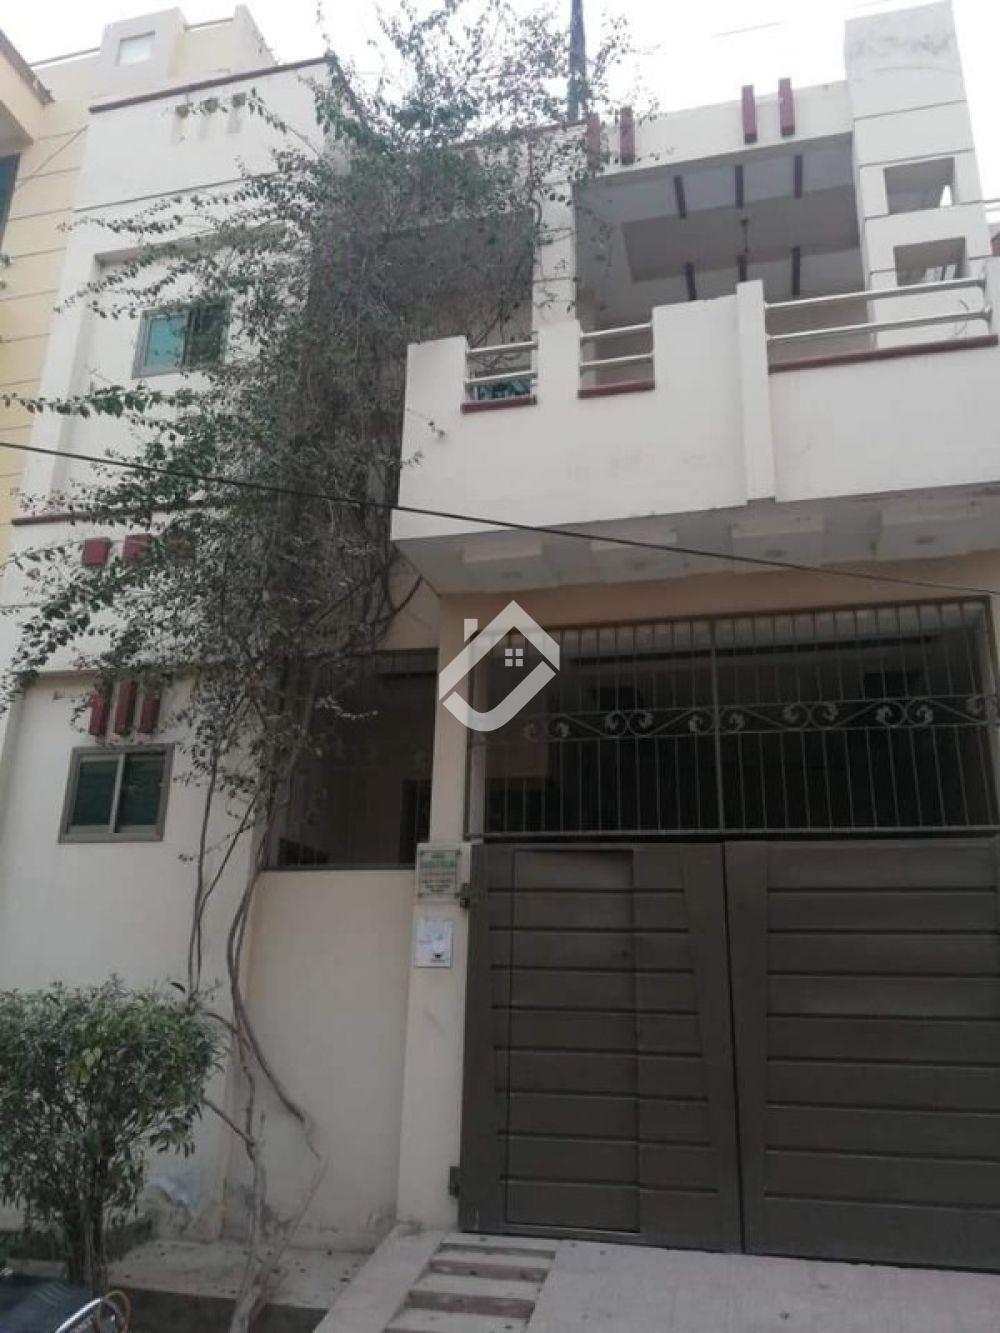 View  3.5 Marla Double Storey House Is Available For Sale In Asad Park Phase 1 in Asad Park Phase 2, Sargodha